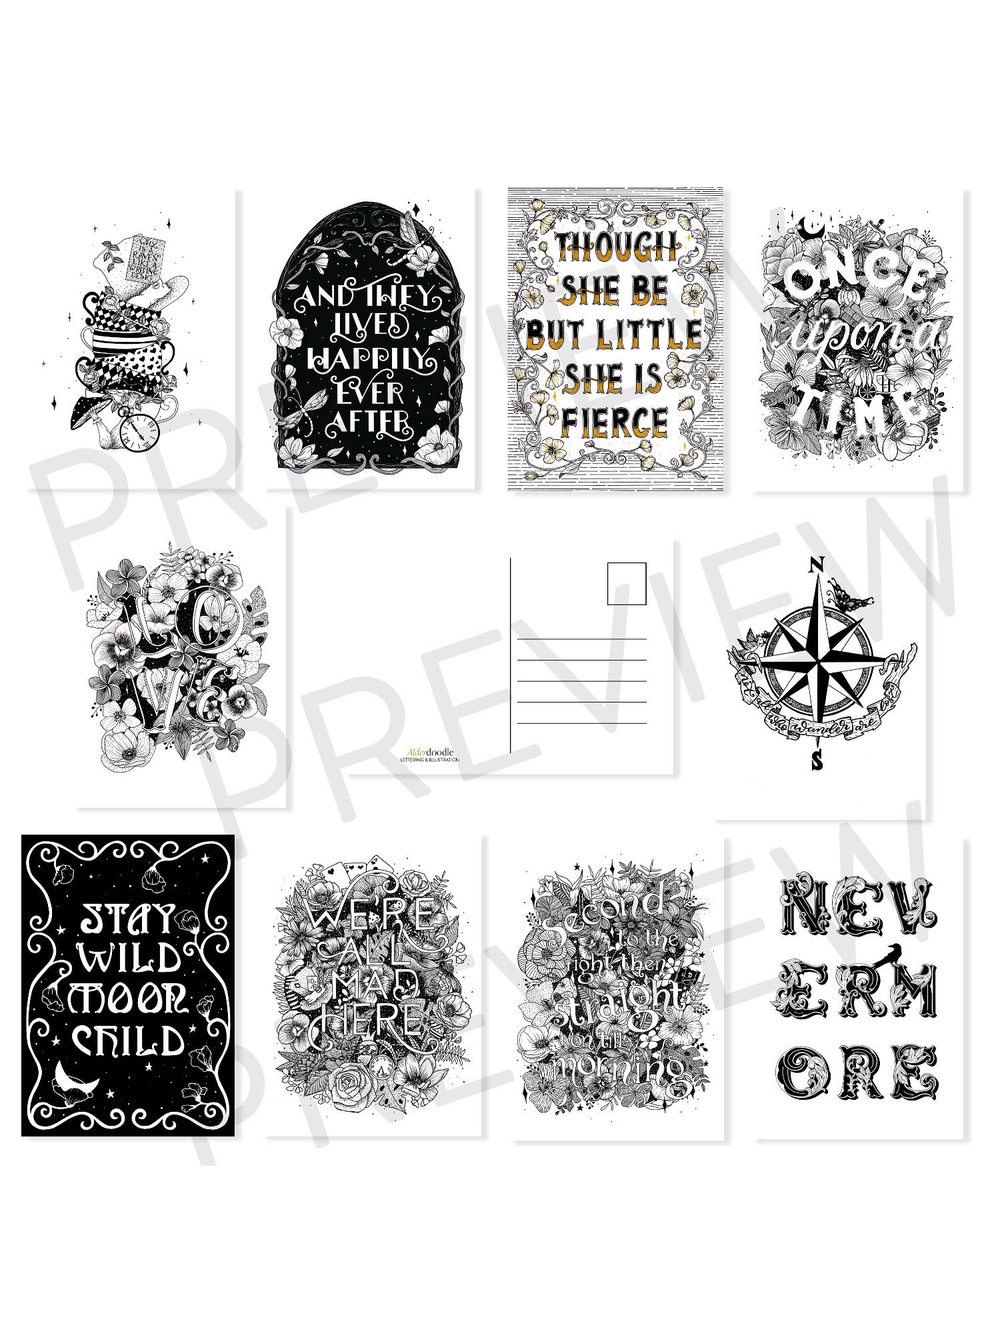 Temporary tattoos in fun tarot and d&d nerd inspired designs — Alderdoodle  - DnD Accessories & Illustration